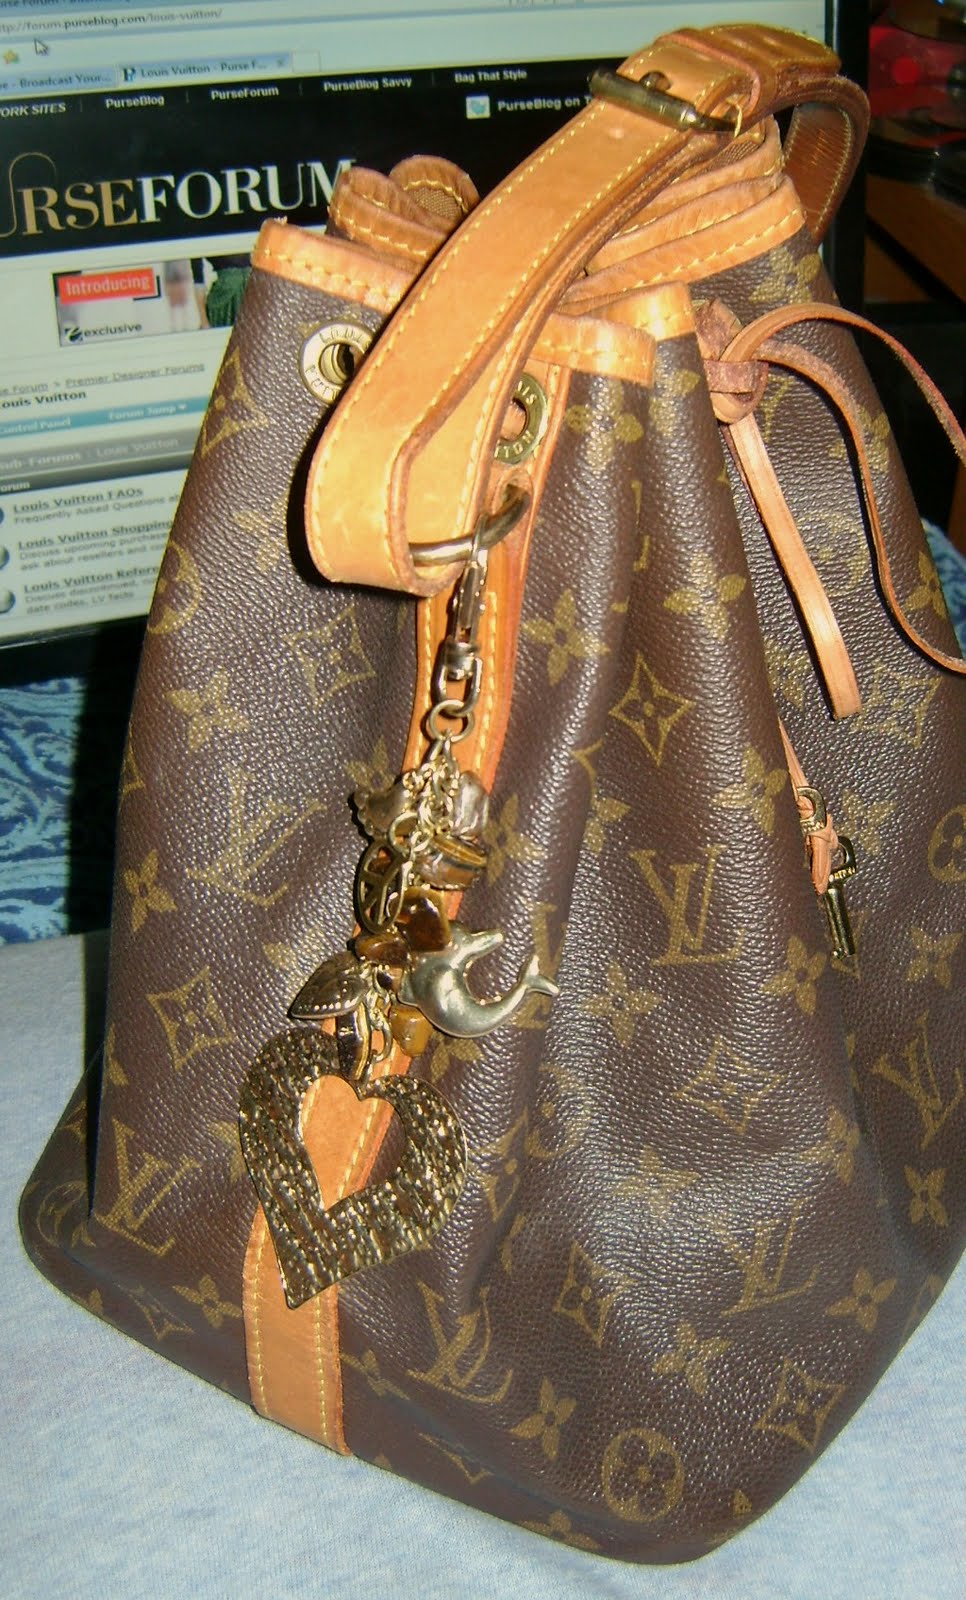 What Is The Classic Louis Vuitton Bag